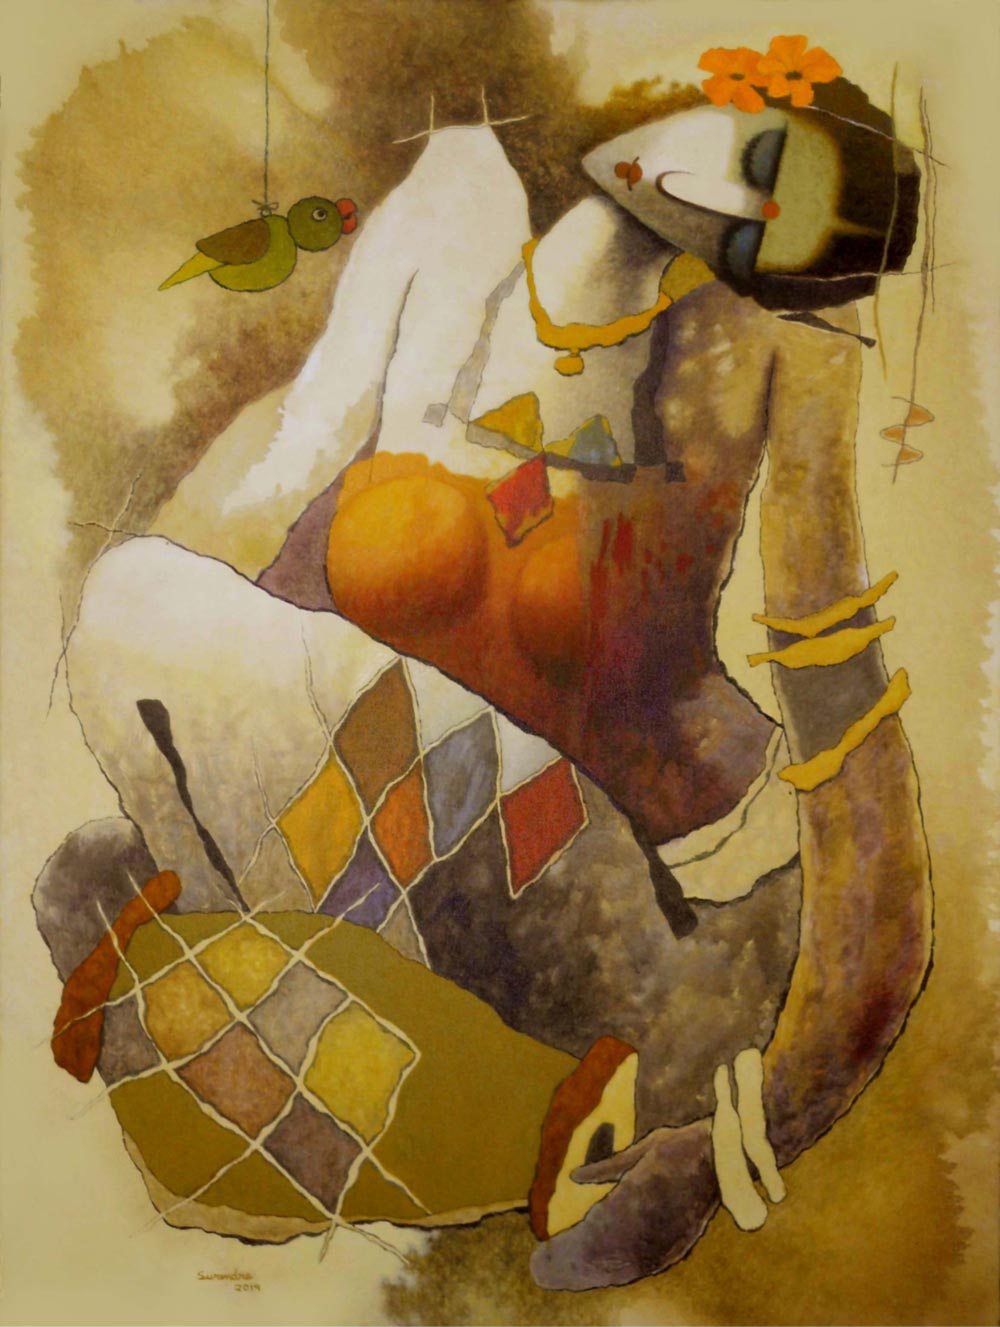 Figurative Painting with Oil on Canvas "Untitled-1" art by Surendra Pal Singh